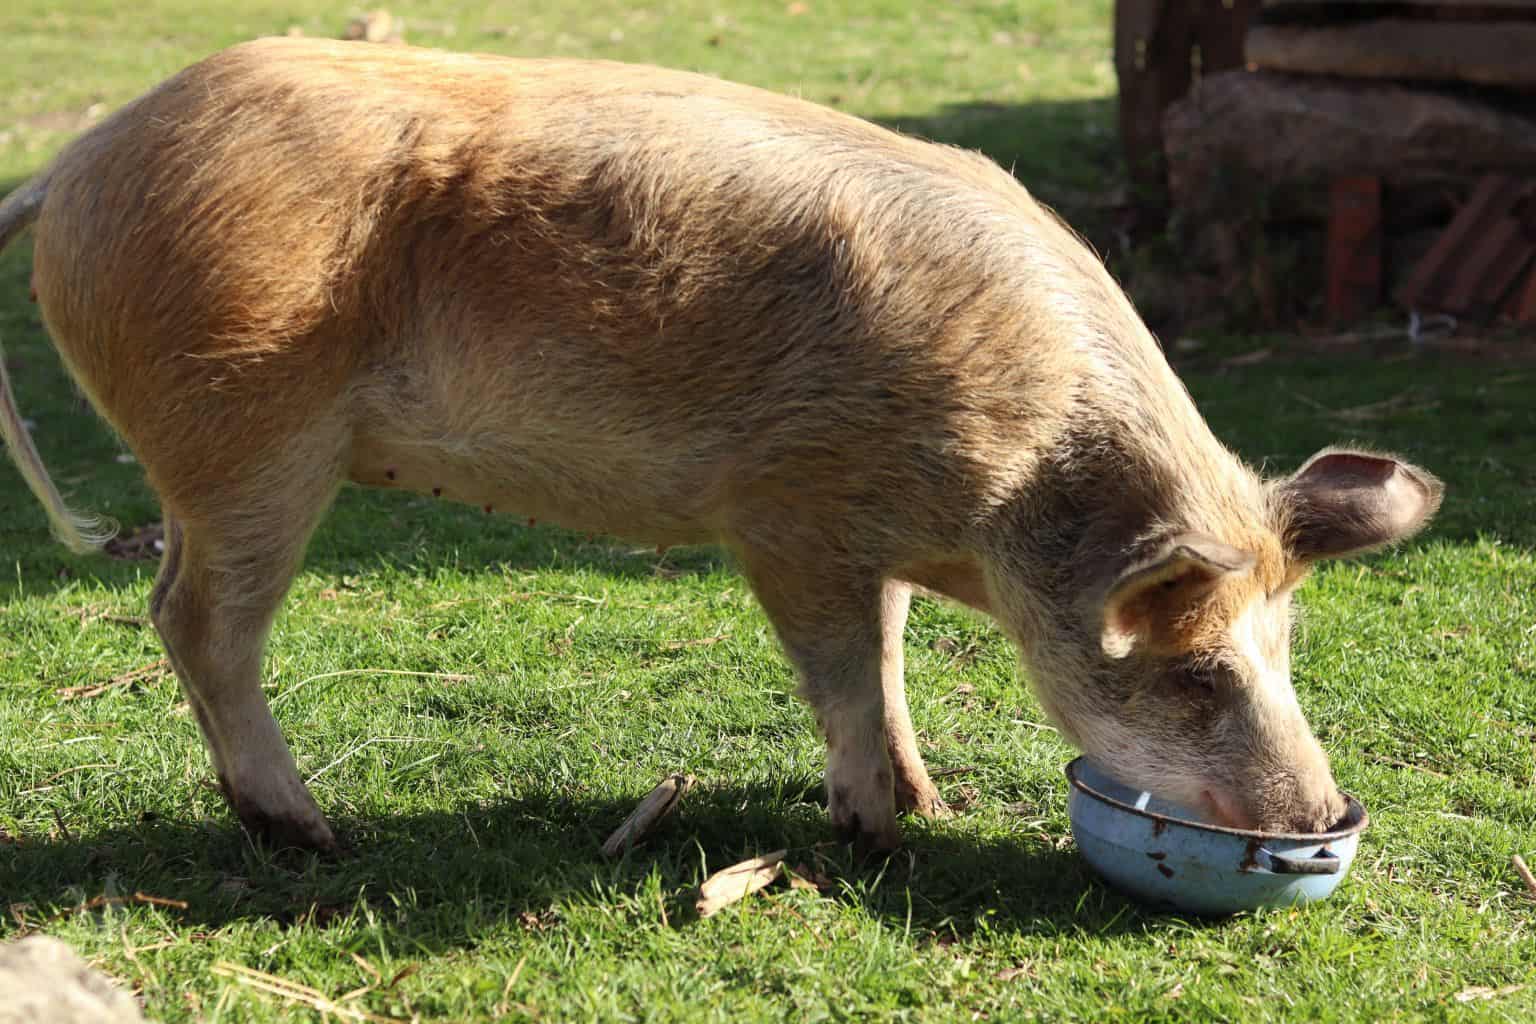 pig eating from a bowl